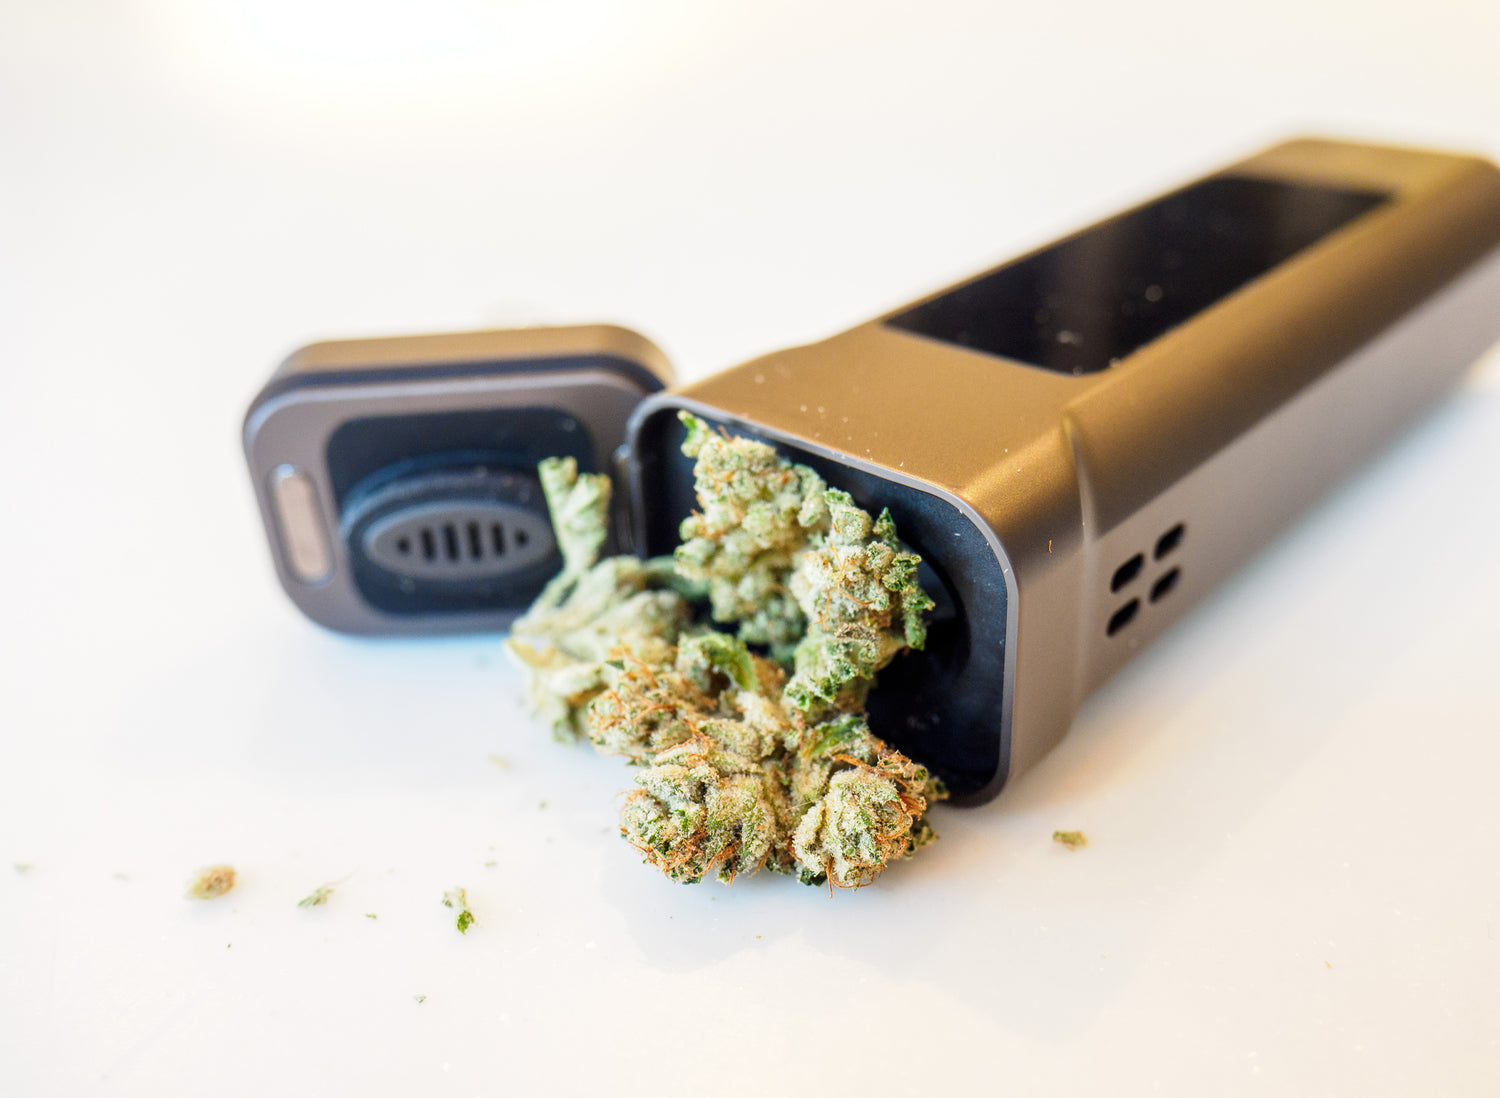 Best Devices to Smoke Cannabis With - HEMPER